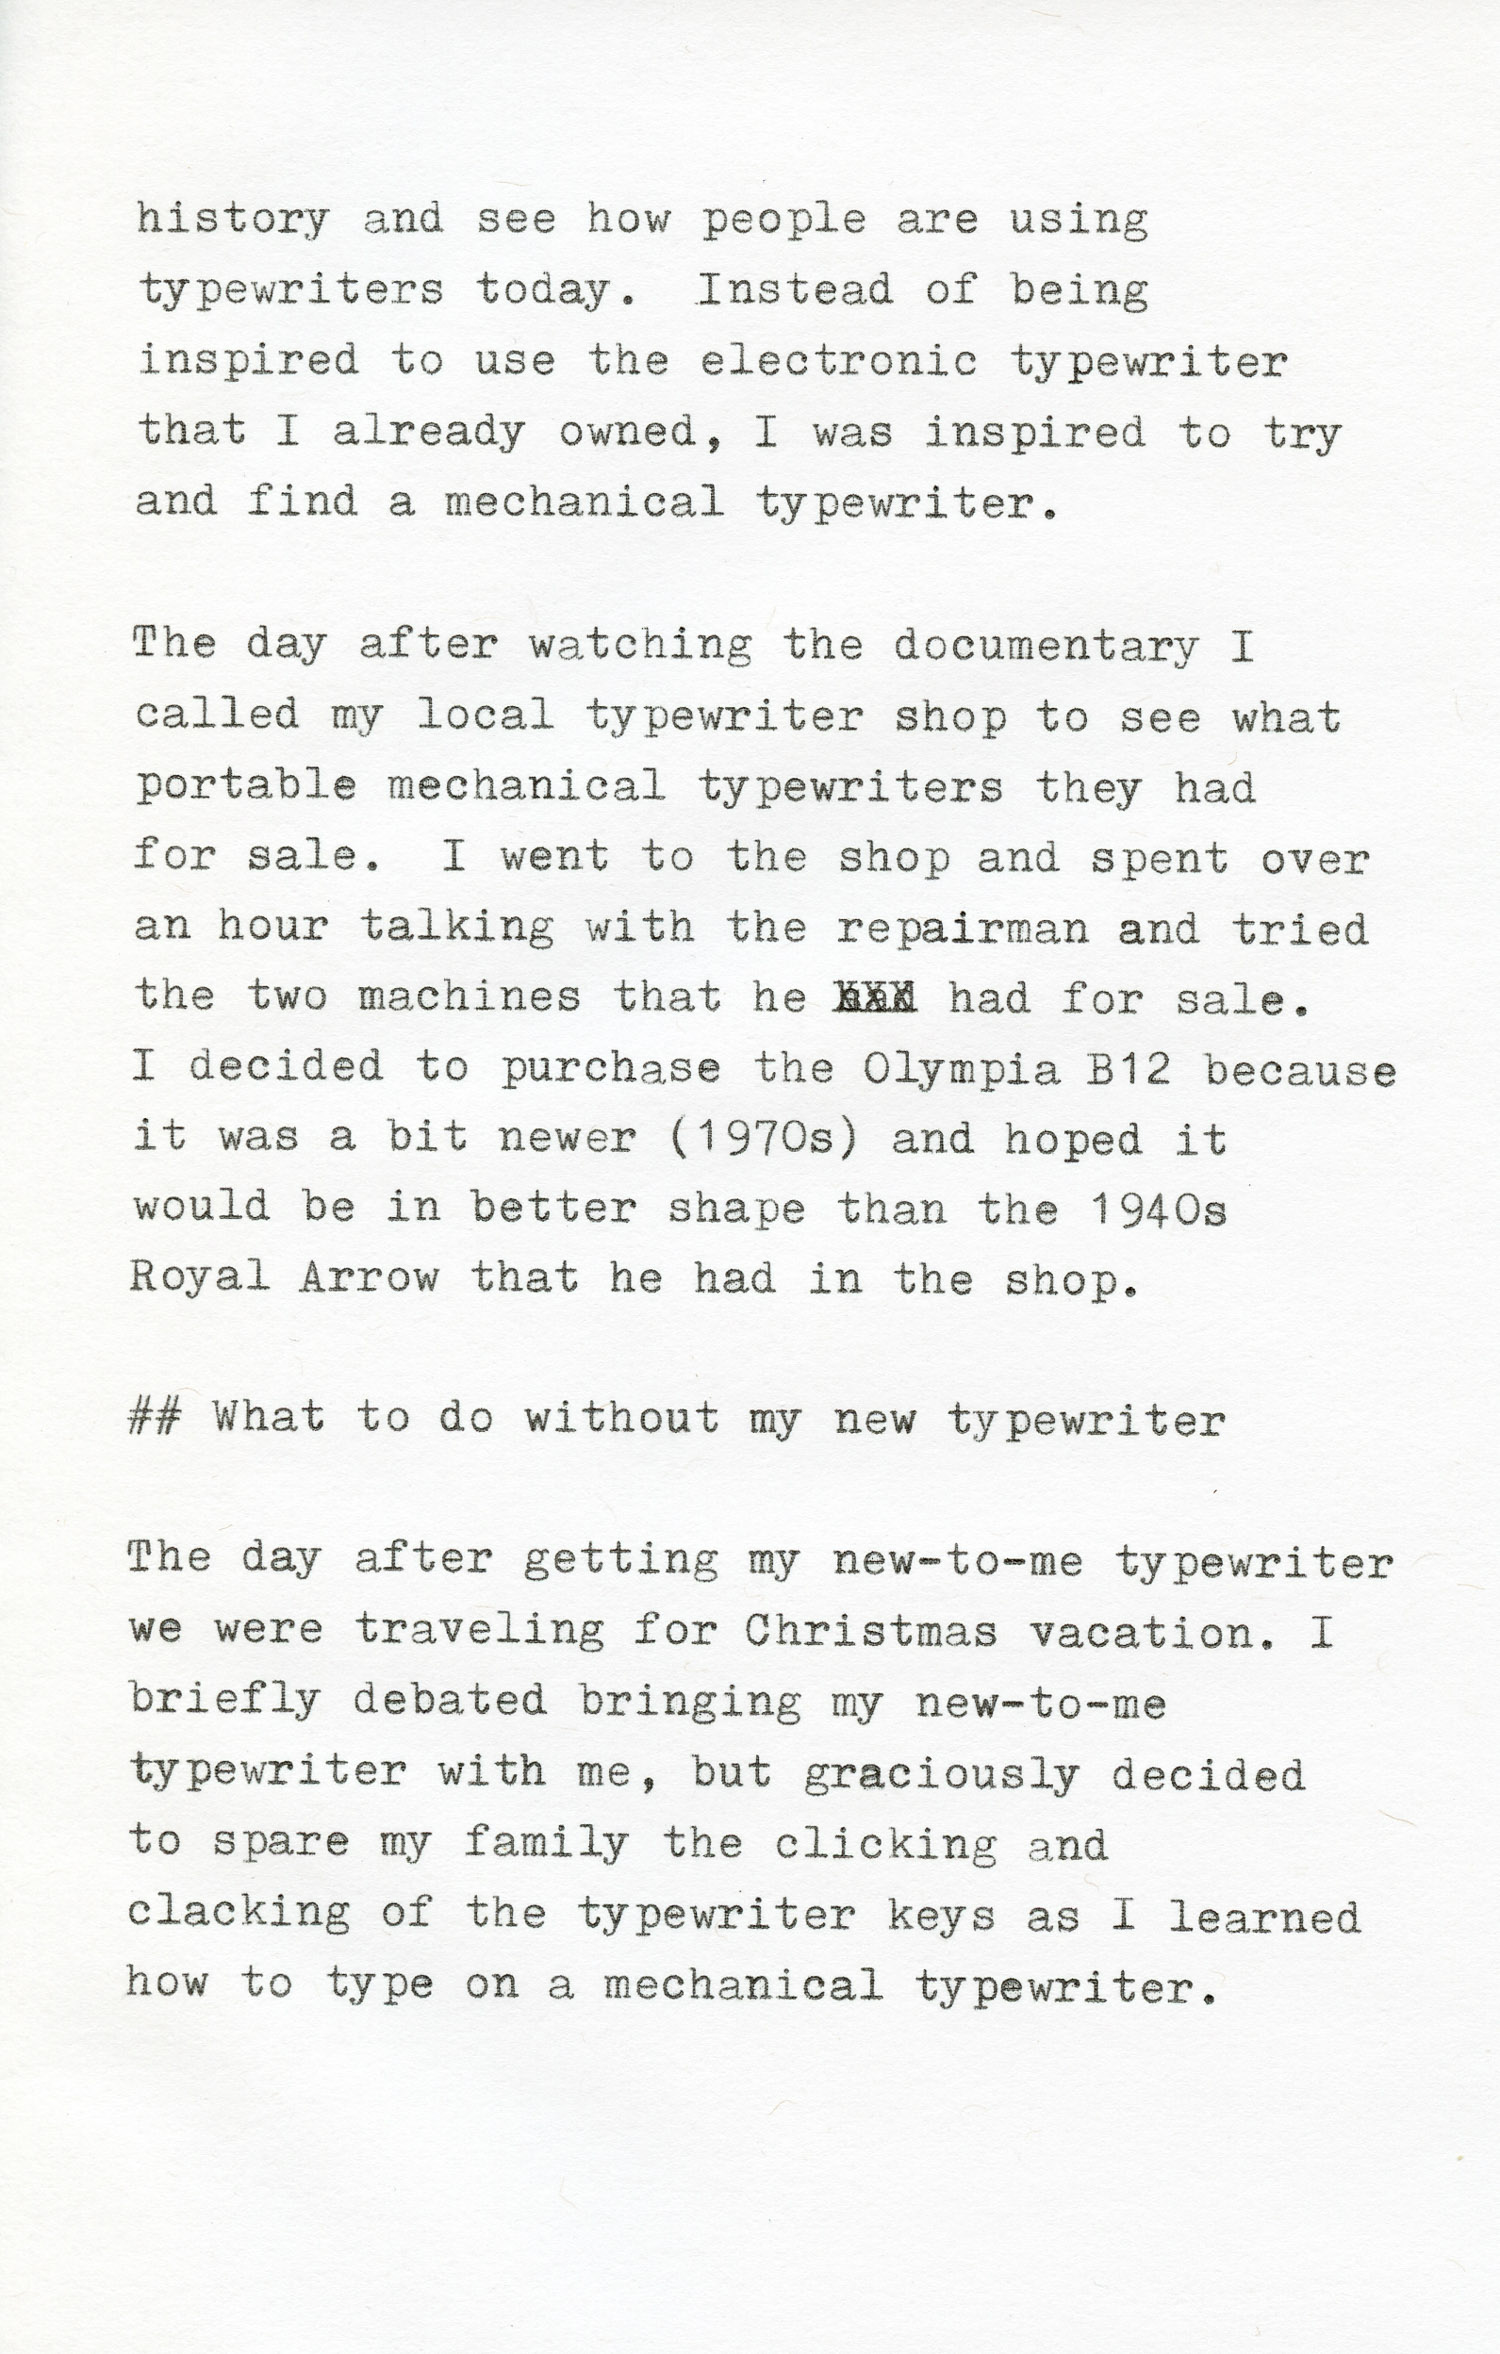 Scan of typed article, page 2